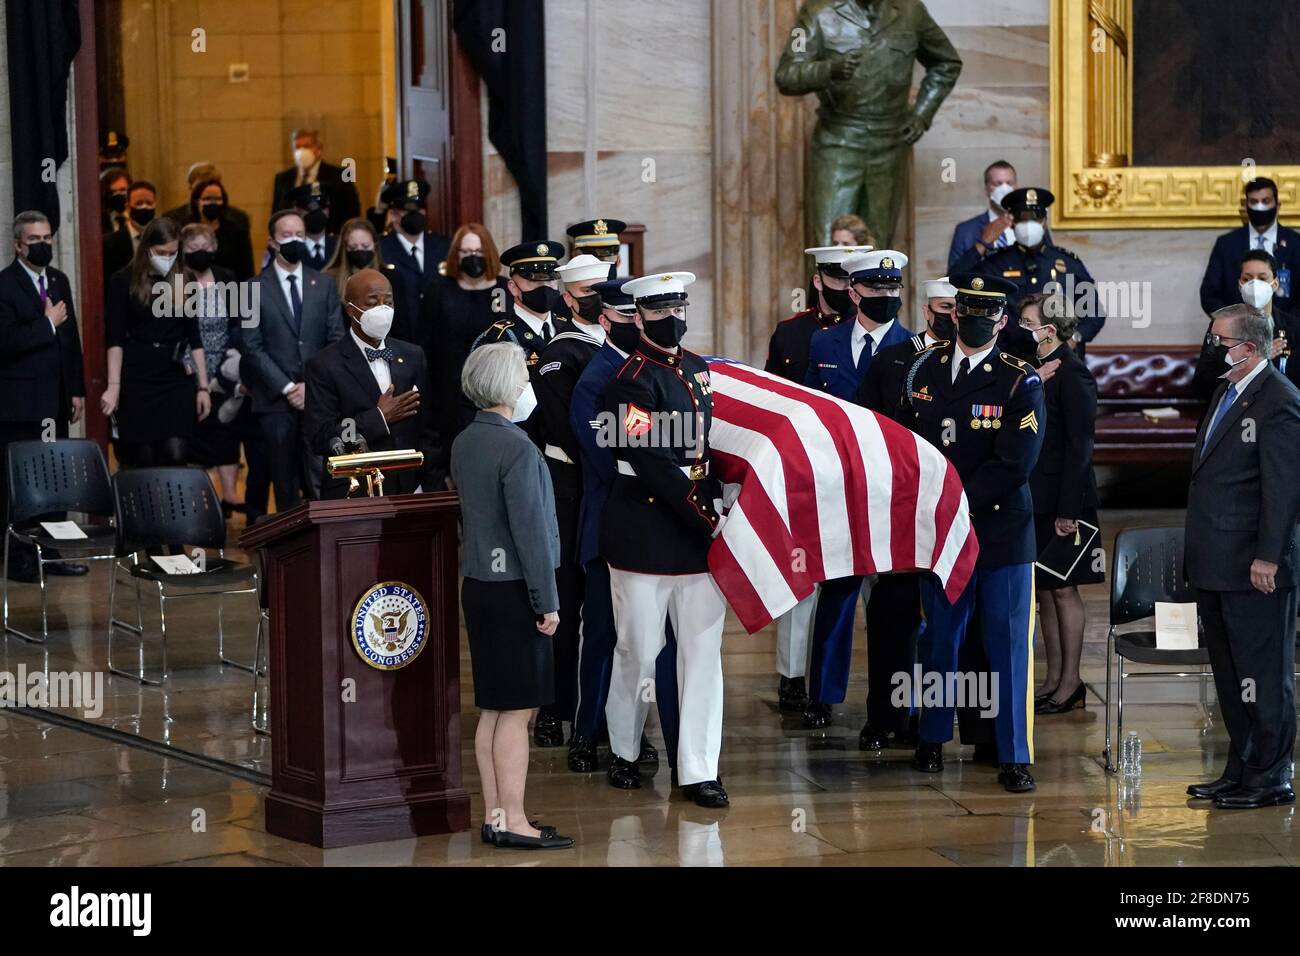 Washington, DC, USA. 13th Apr, 2021. The remains of the late U.S. Capitol Police officer William 'Billy' Evans arrive for a memorial service as he lies in honor in the Rotunda at the U.S. Capitol on April 13, 2021 in Washington, DC. Officer Evans was killed in the line of duty during the attack outside the U.S. Capitol on April 2. He is the sixth Capitol Police officer to die in the line of duty in the nearly 200 years since the force was created. Credit: Drew Angerer/Pool Via Cnp/Media Punch/Alamy Live News Stock Photo